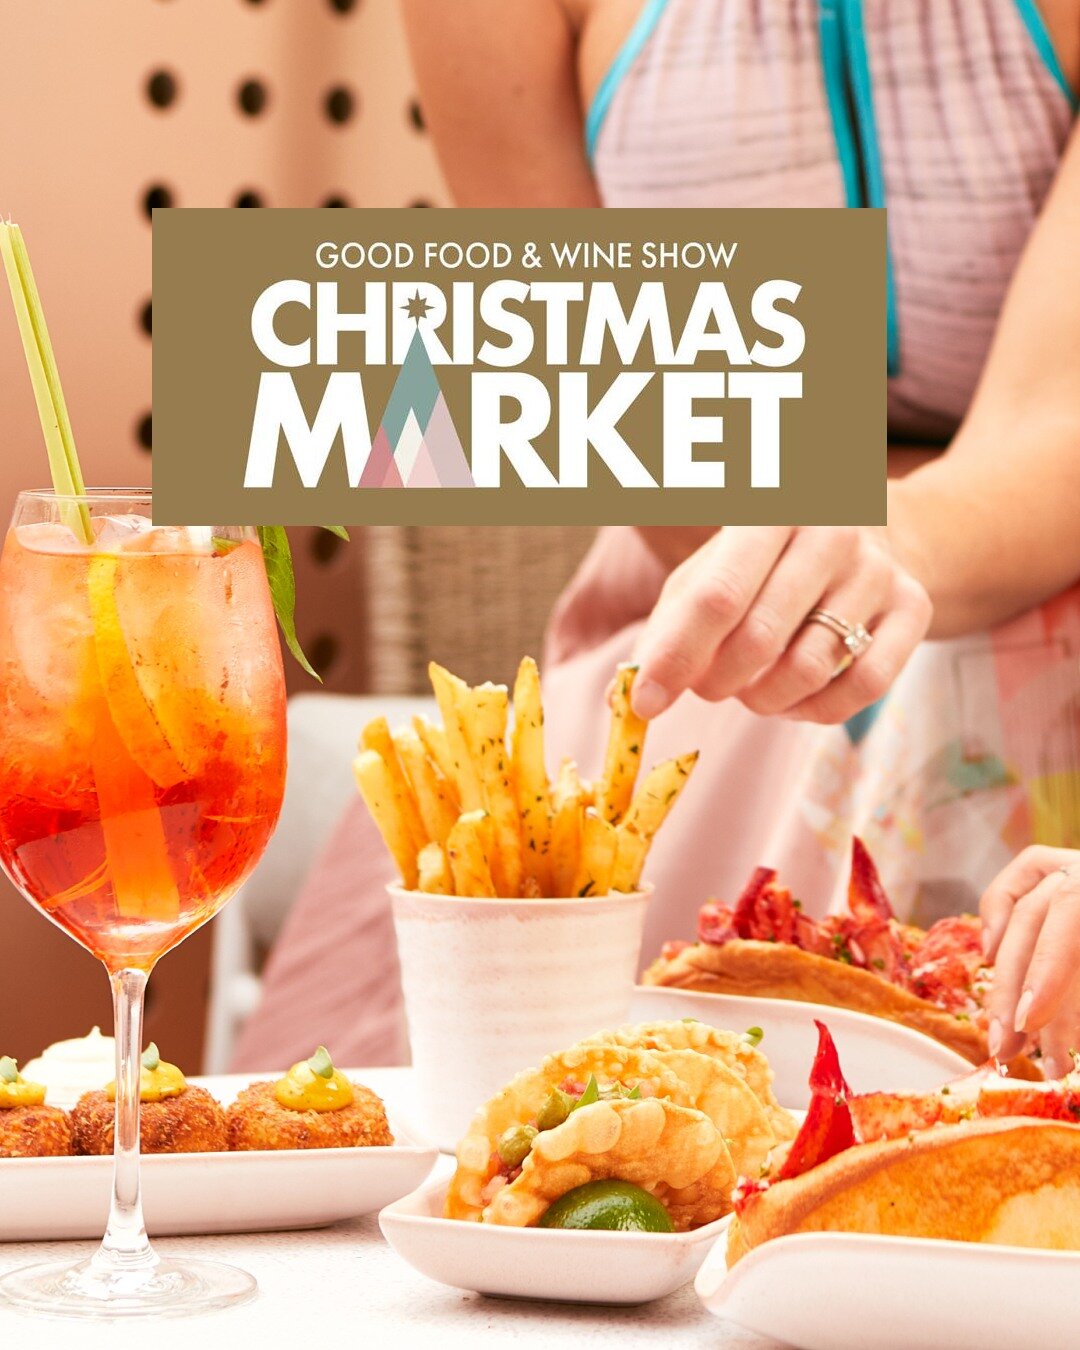 Pinchy's Pop-Up is back this week at @goodfoodwine Christmas Market!  This Friday to Sunday, we'll be at the Royal Exhibition Centre alongside other fabulous foodie names.